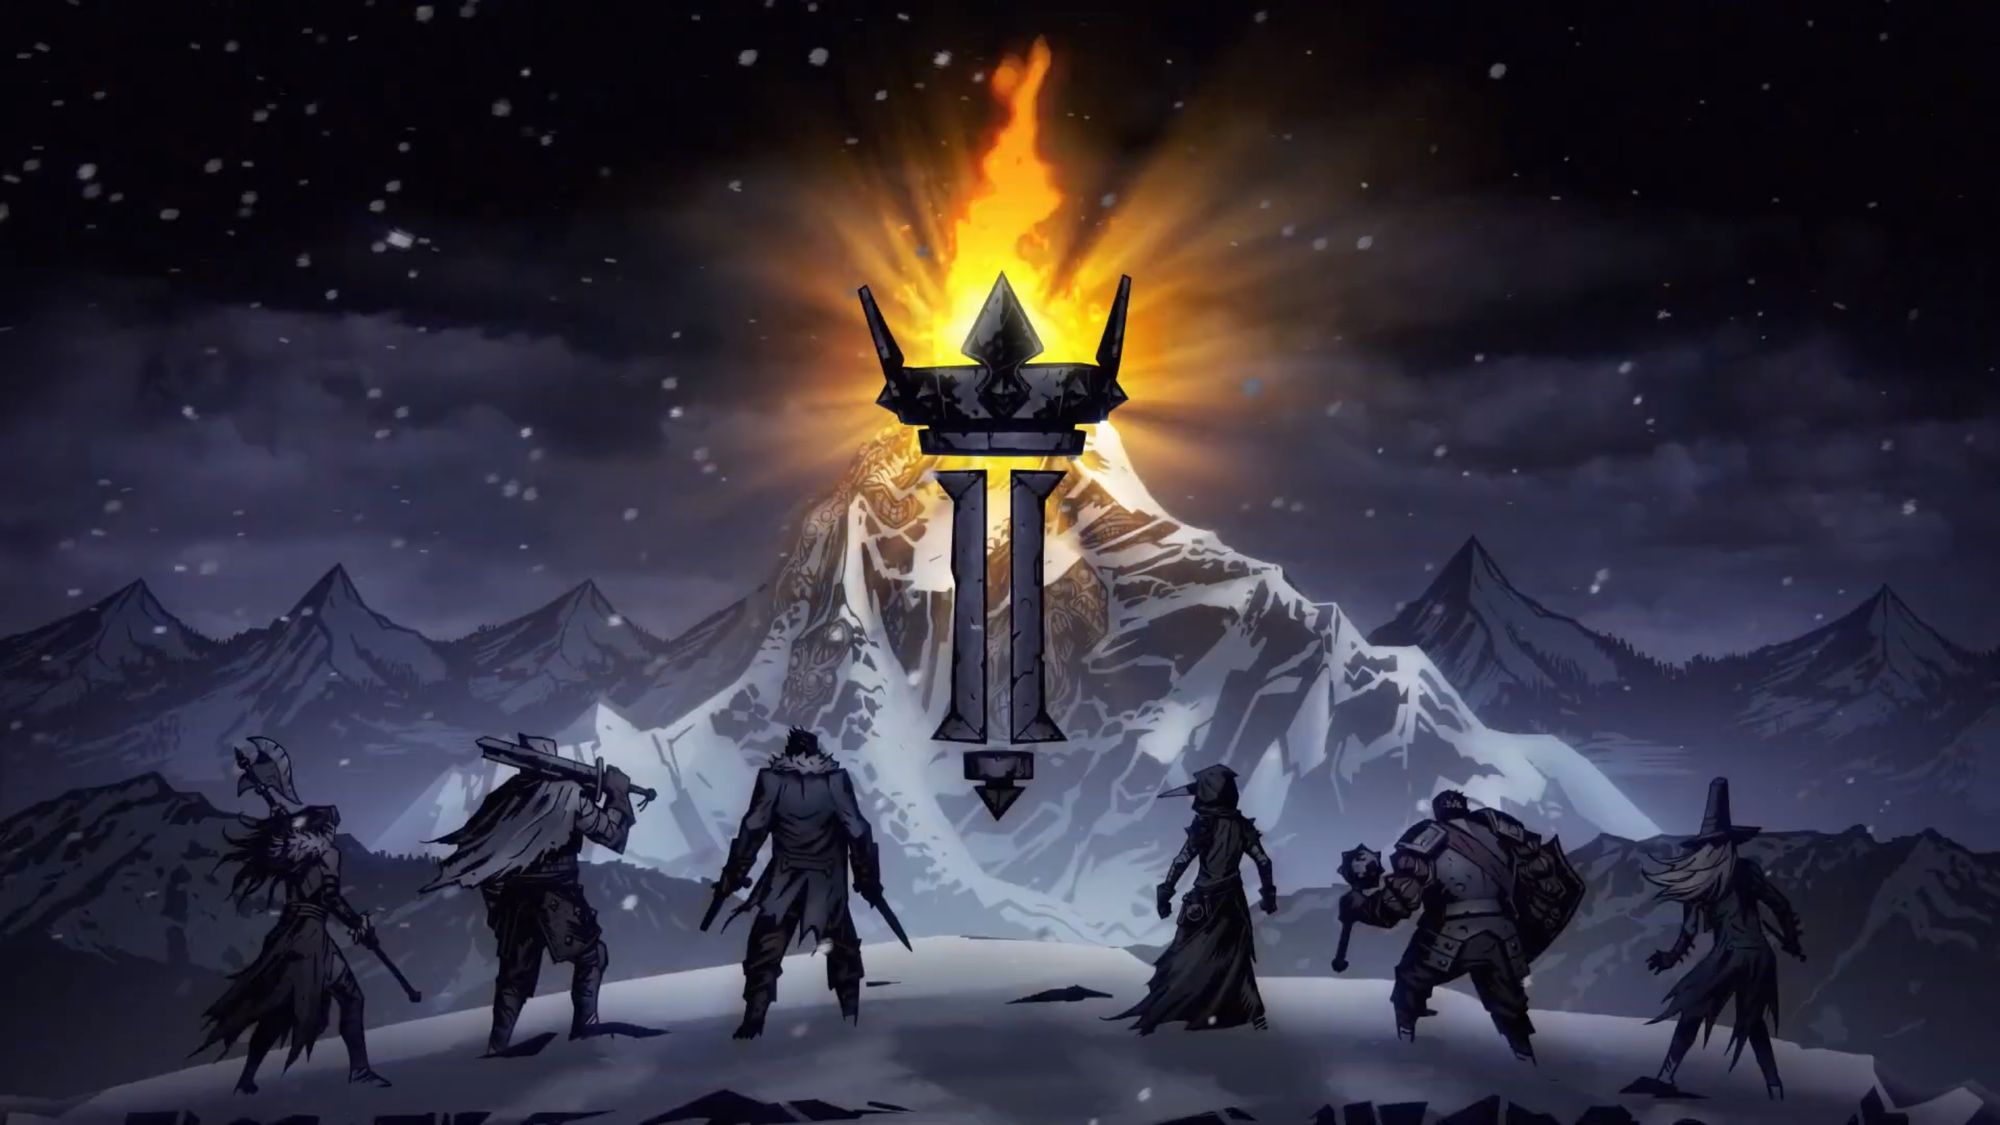 Artwork from The Darkest Dungeon II, depicting six characters approaching a torch on a snowy mountaintop.